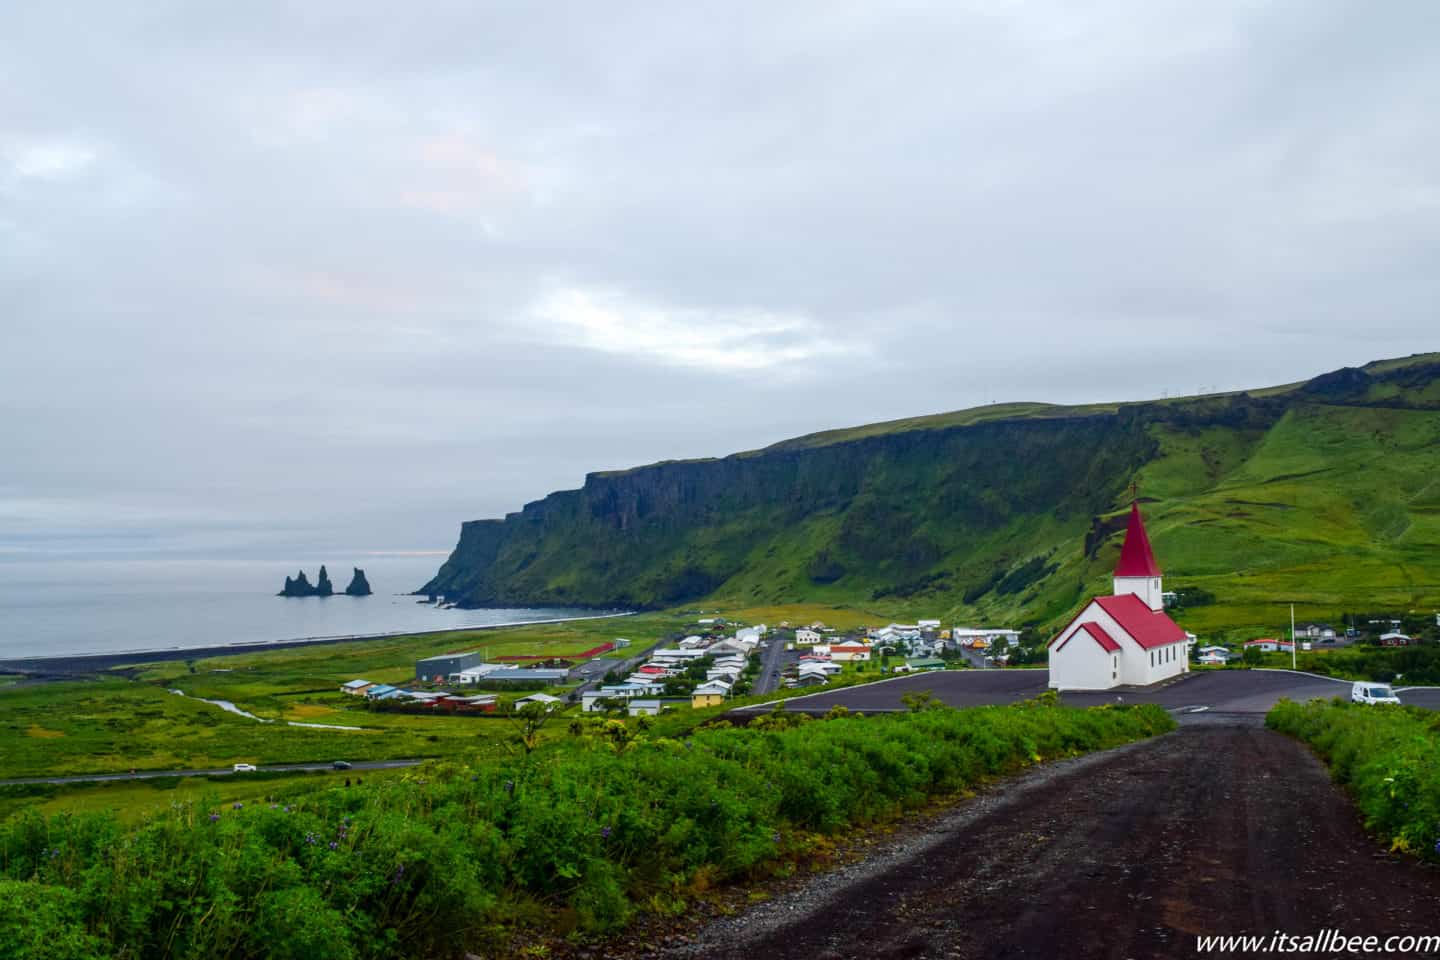 Thinking Of Dreamy Road Tips In Camper Rentals in Iceland? Read This First! - best camper rental iceland